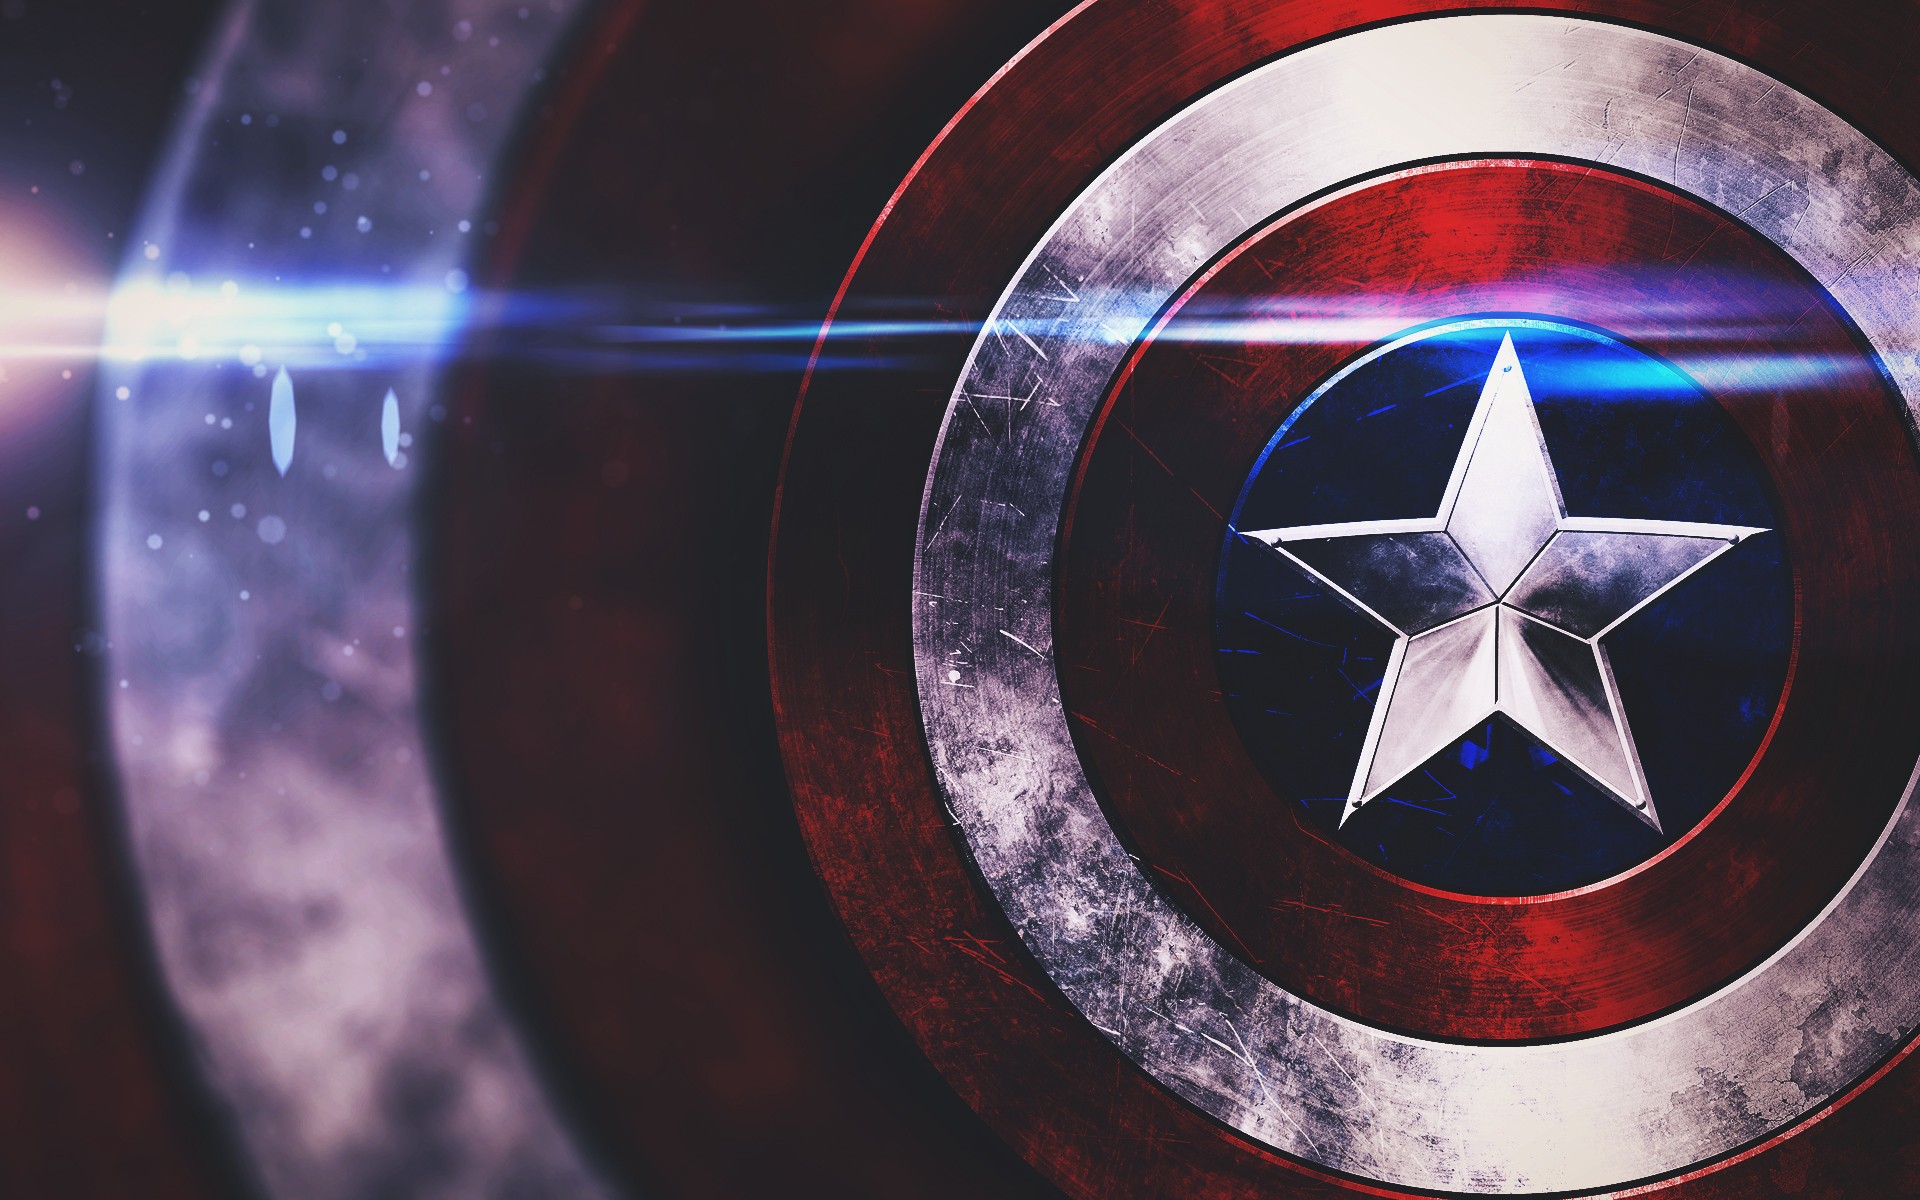 Captain America Shield Wallpaper Download Free Full Hd Wallpapers For Desktop Computers And